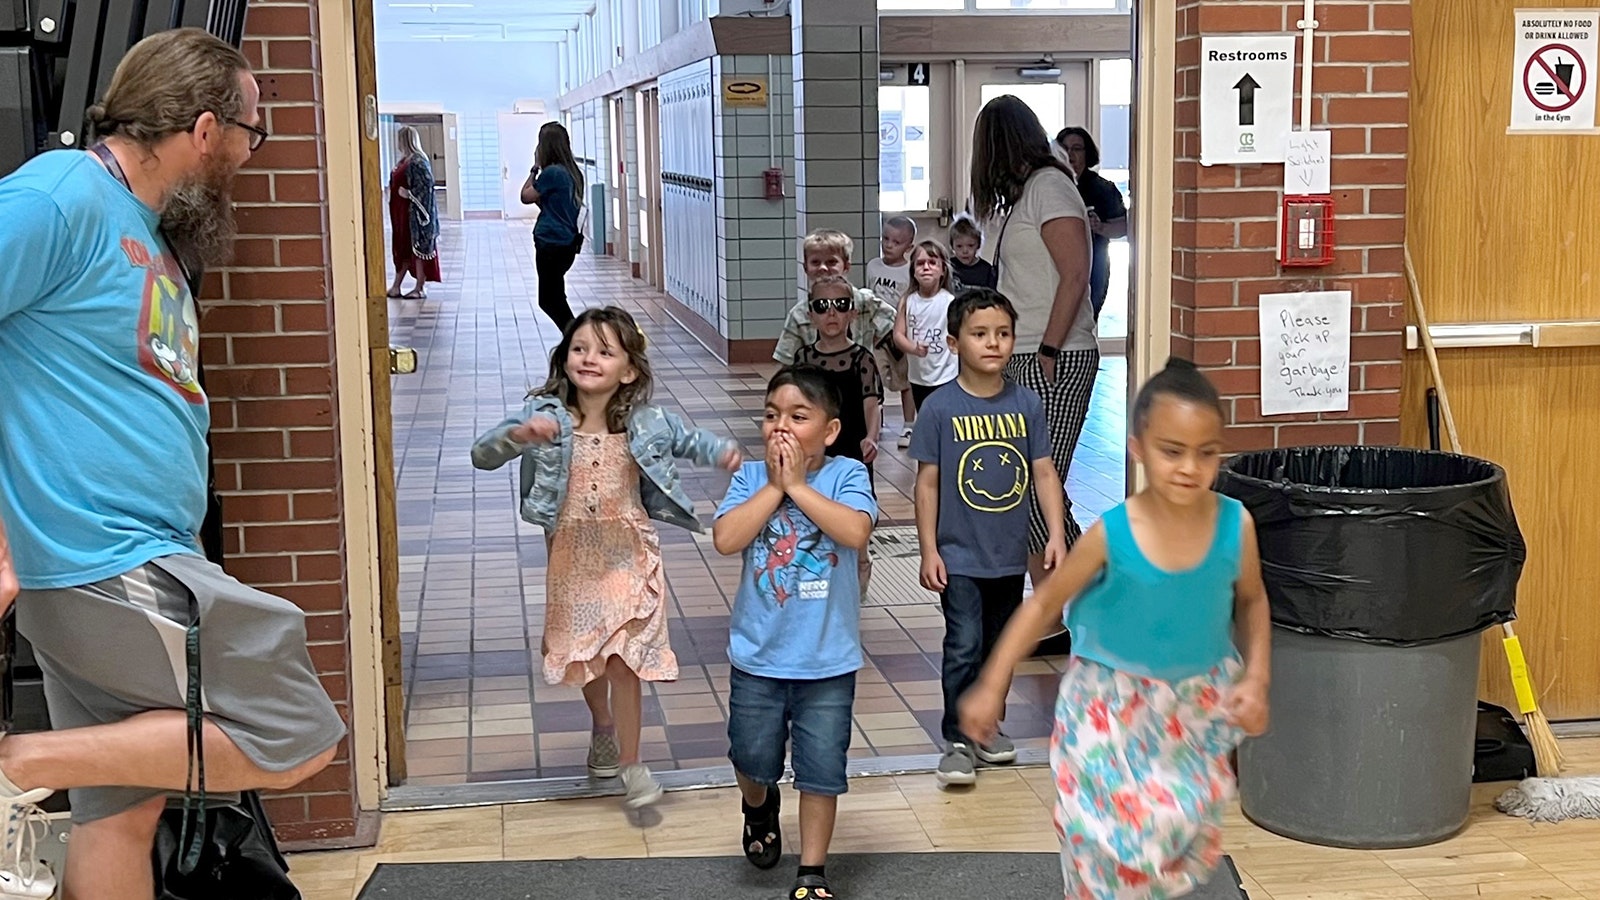 Students from Arp Elementary School in Cheyenne react to seeing the Eastridge building they'll attend school in next year. Now empty, the facility used to be the former Carey Junior High School.